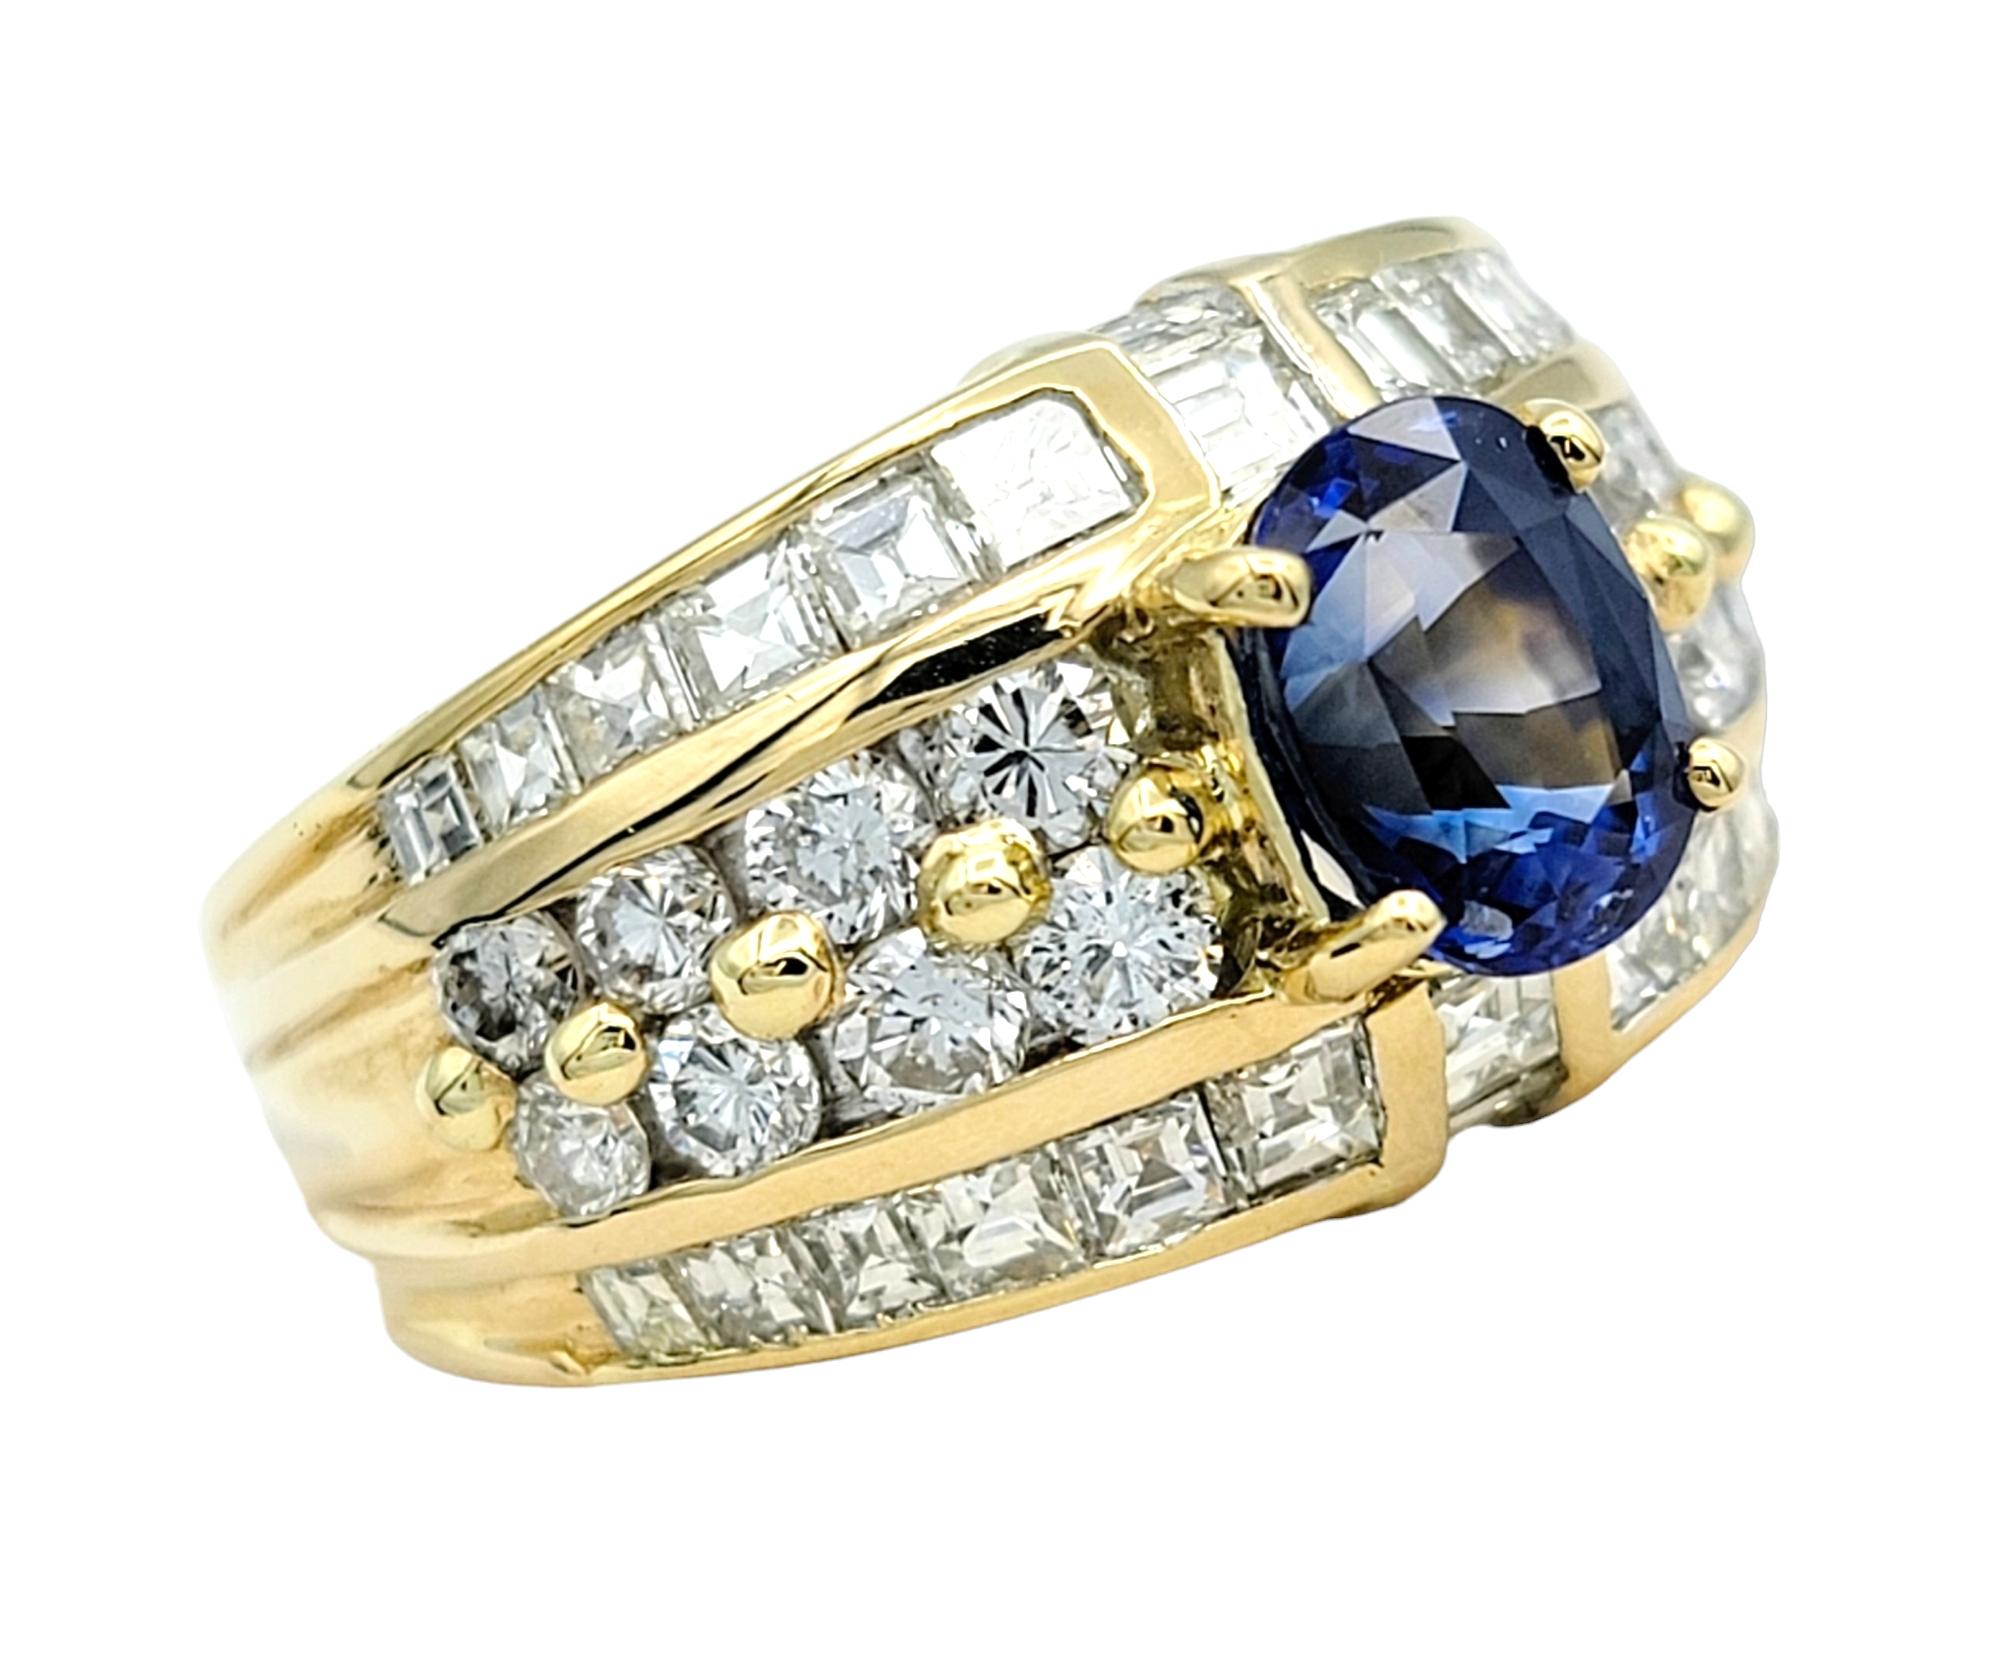 Ring Size: 6.5

Elegance meets sophistication in this exquisite 18 karat gold ring, a true embodiment of timeless beauty. The centerpiece of this luxurious ring is a mesmerizing 1.52 carat blue cushion mixed cut sapphire that captures the essence of